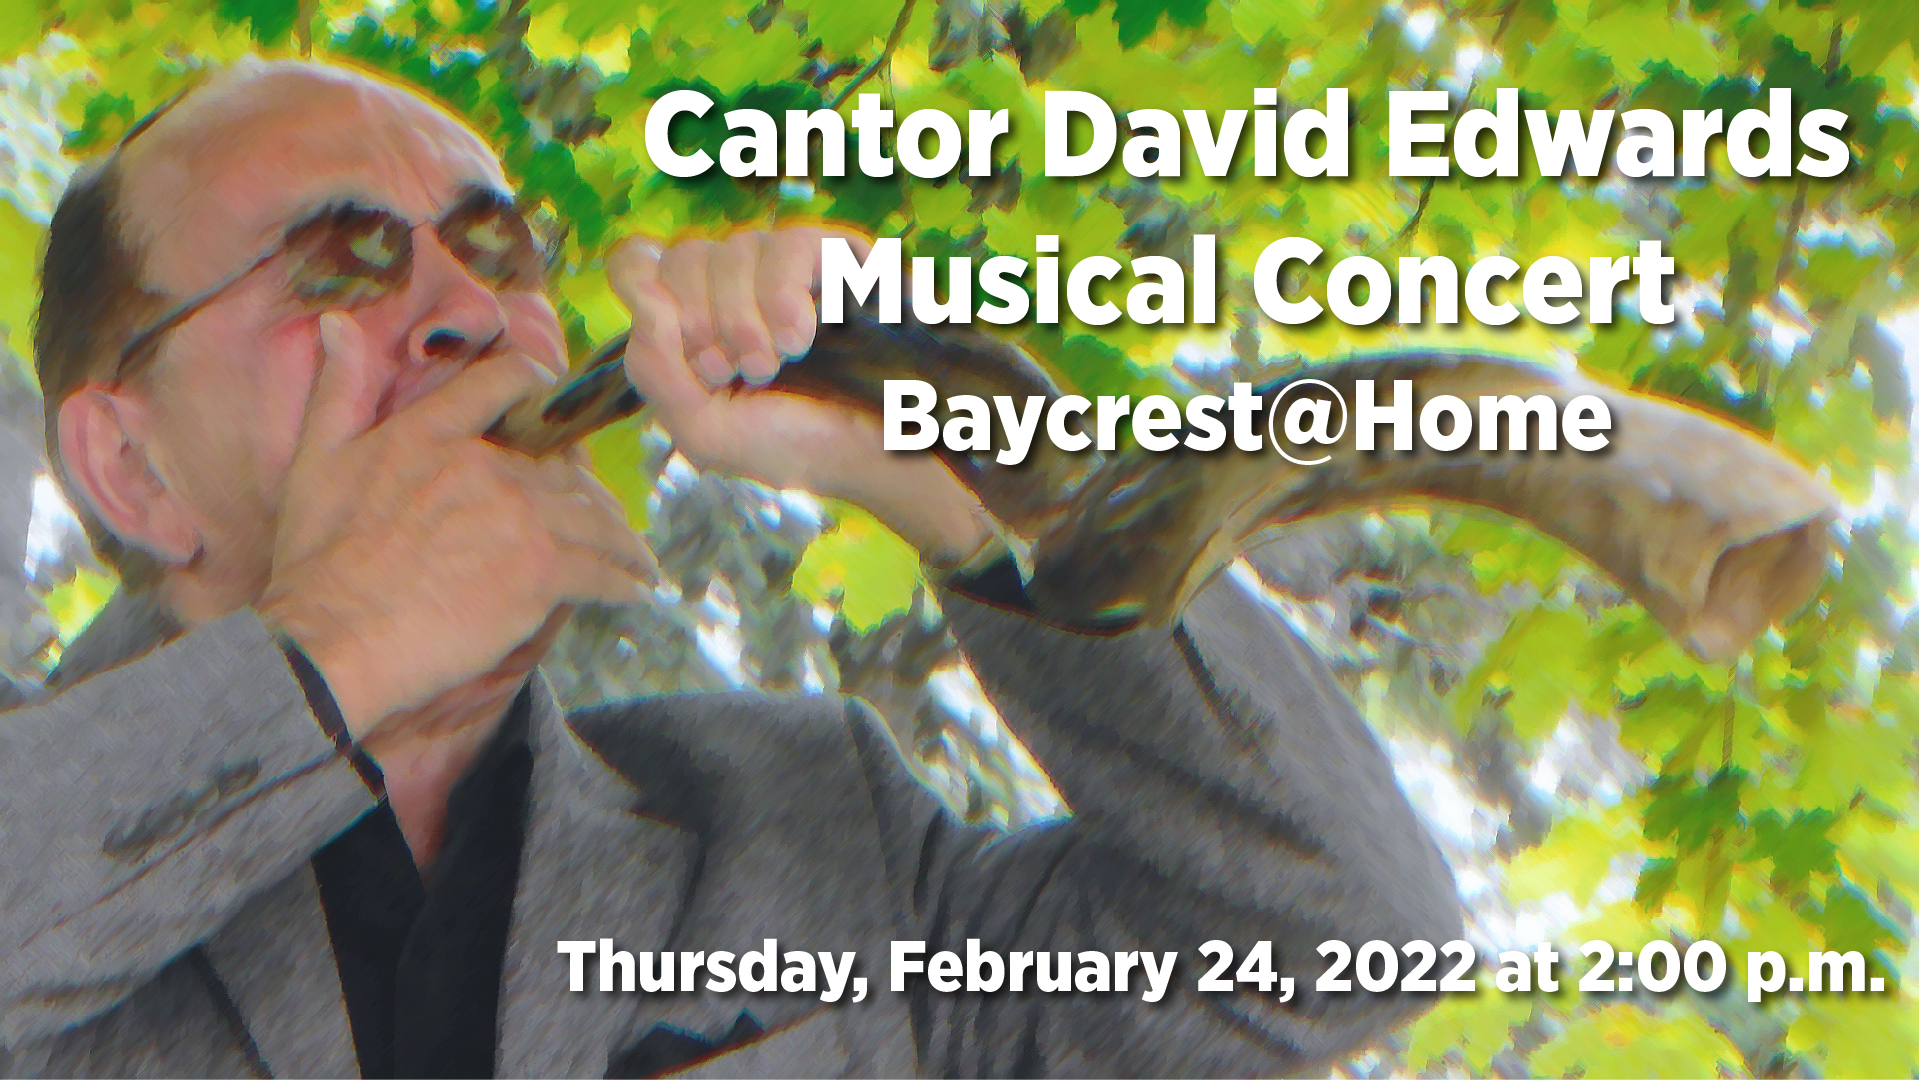 Cantor David blowing into a shofar. Text says, 'Cantor David Musical Concert, Thursday, February 24 at 2:00 p.m.'